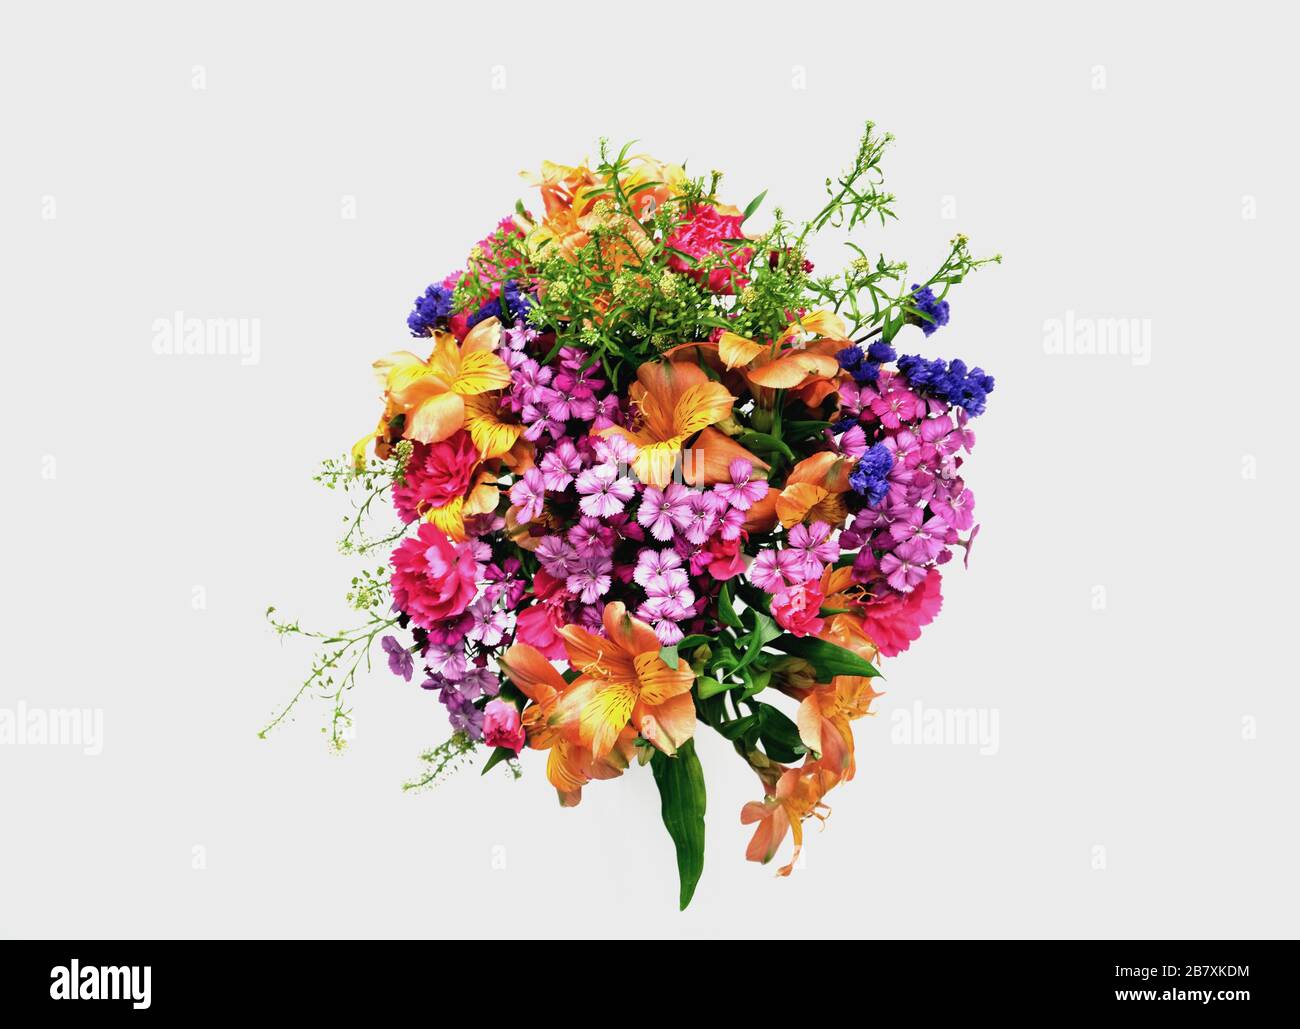 Overhead view of a colourful bouquet of mixed flowers against a white background Stock Photo